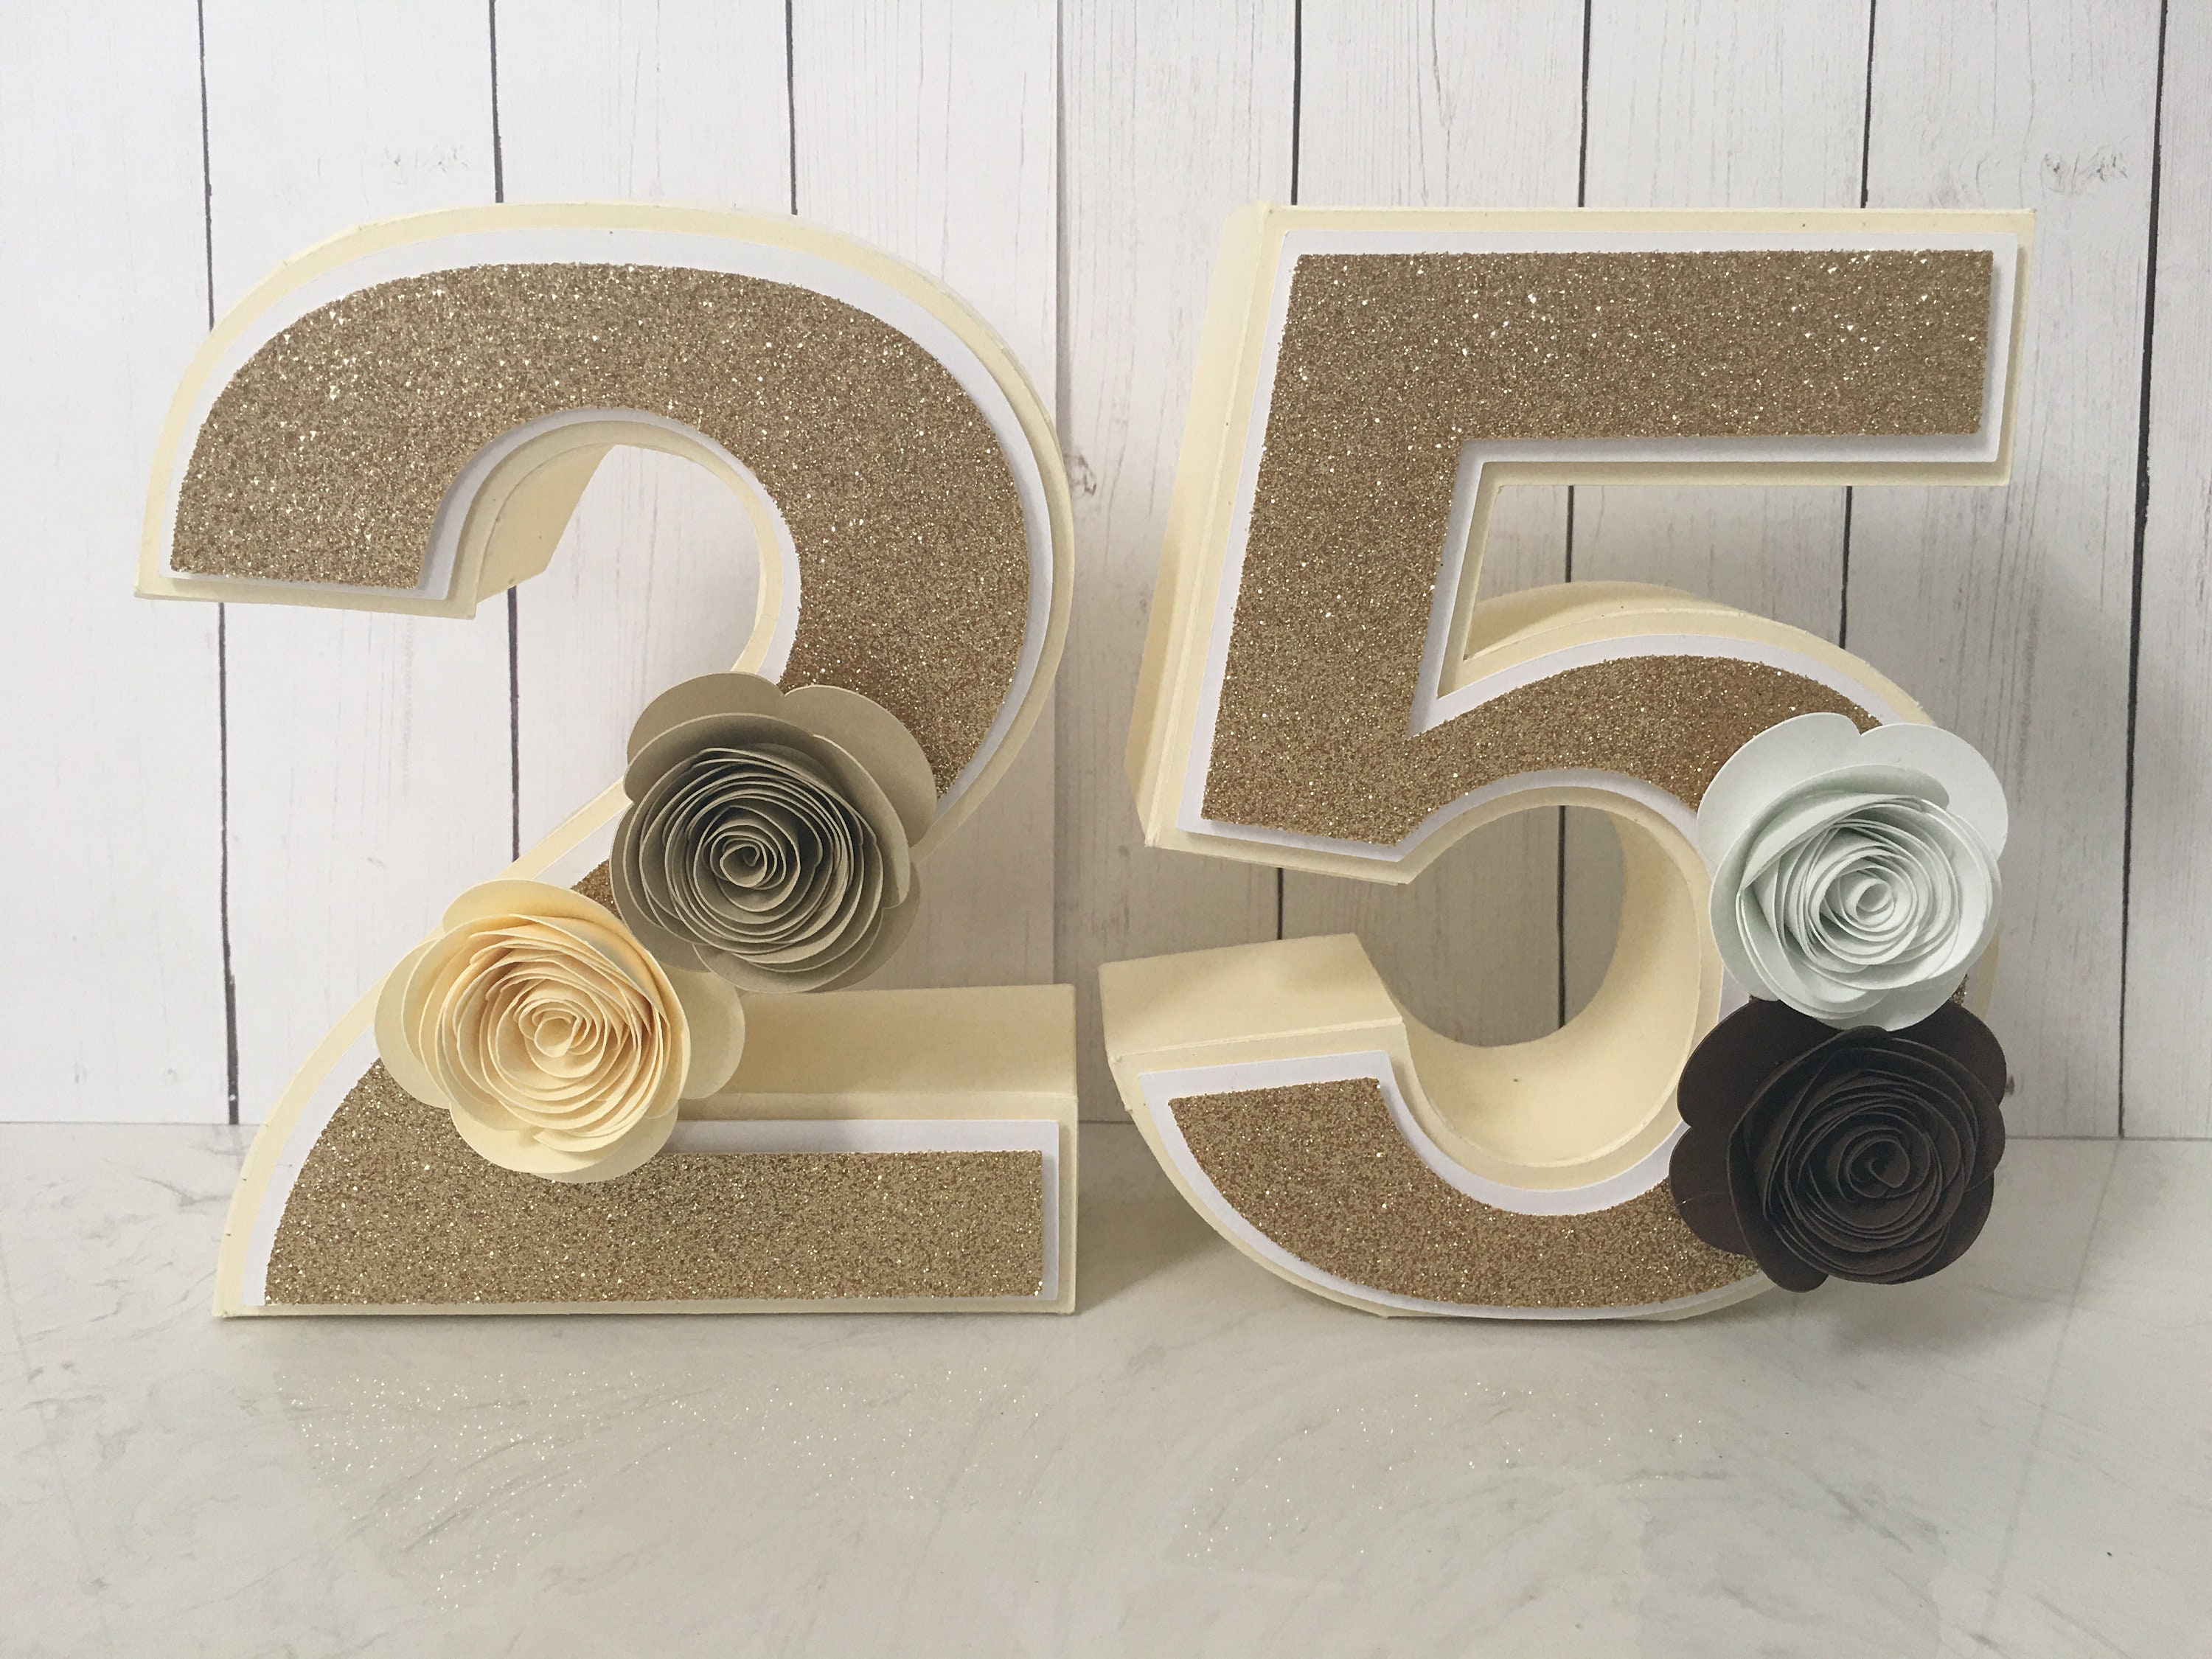 Fillable Handmade Treat Boxes Numbers & Letters 